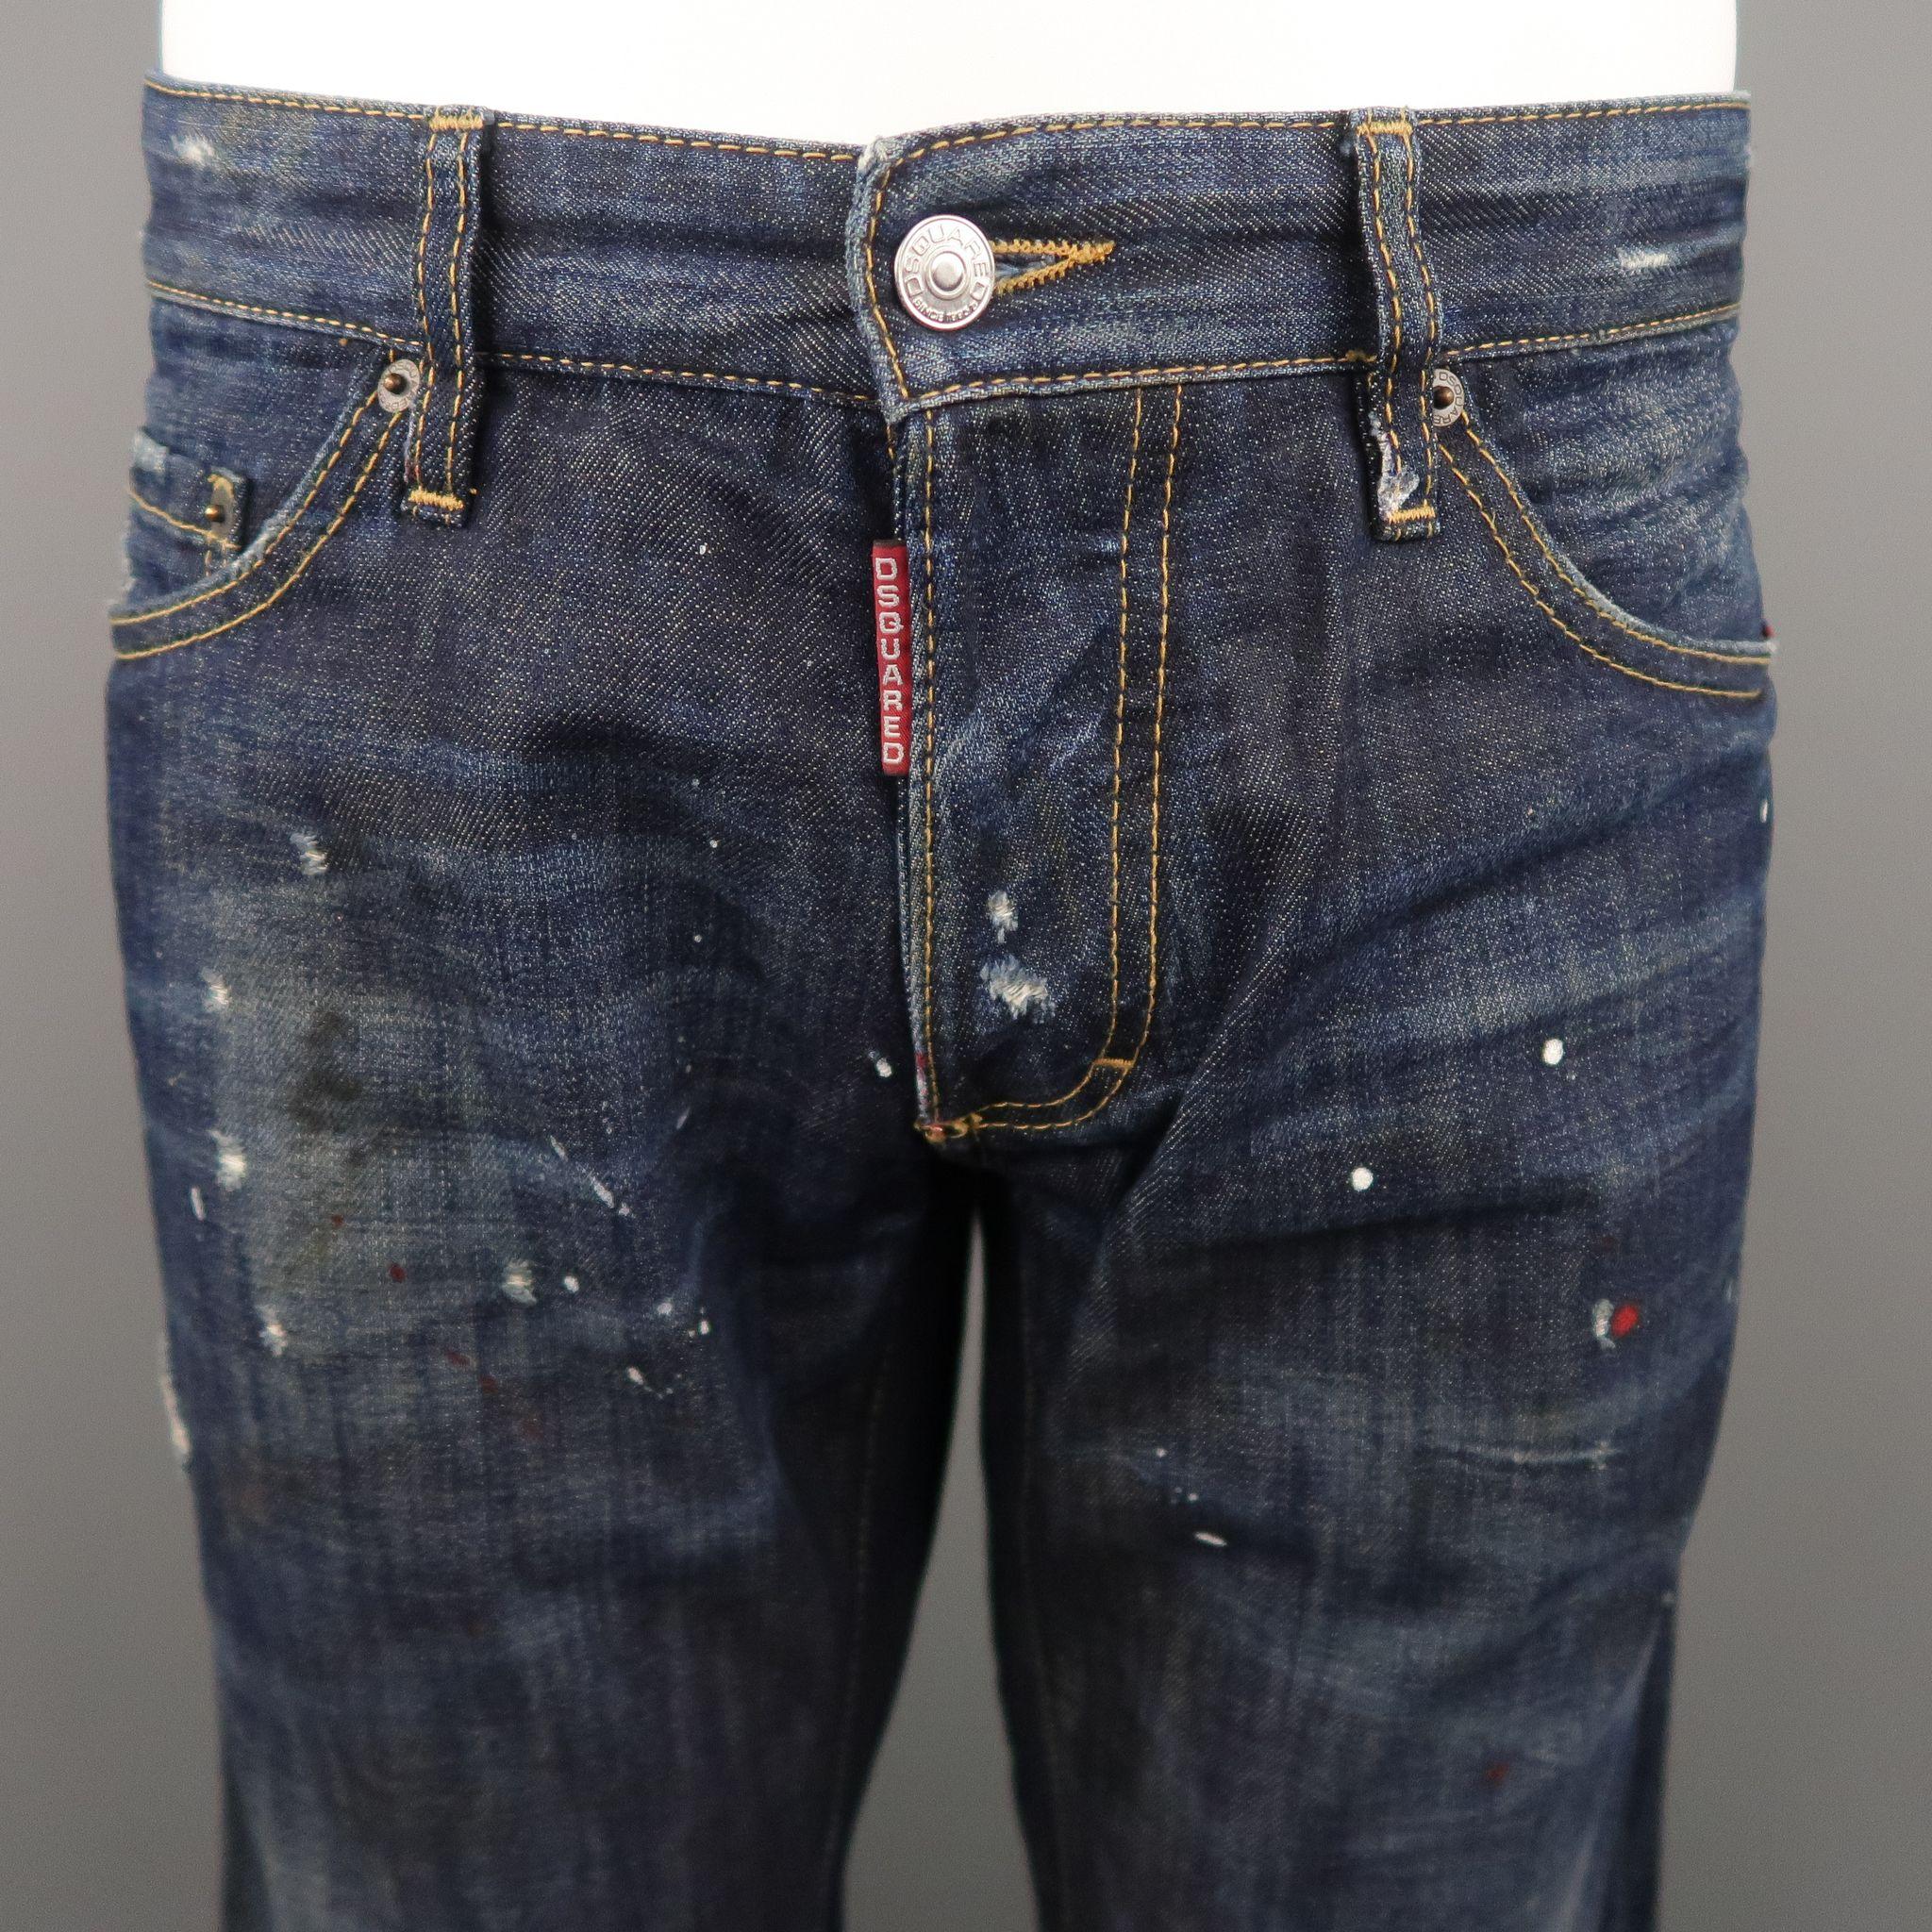 DSQUARED2 Jeans comes in a indigo tone in a denim material, with intentional ink stains throughout and distressed, with a button fly and embroideries at back pockets. Made in Italy.
 
Excellent Pre-Owned Condition.
Marked: 50 IT
 
Measurements:
